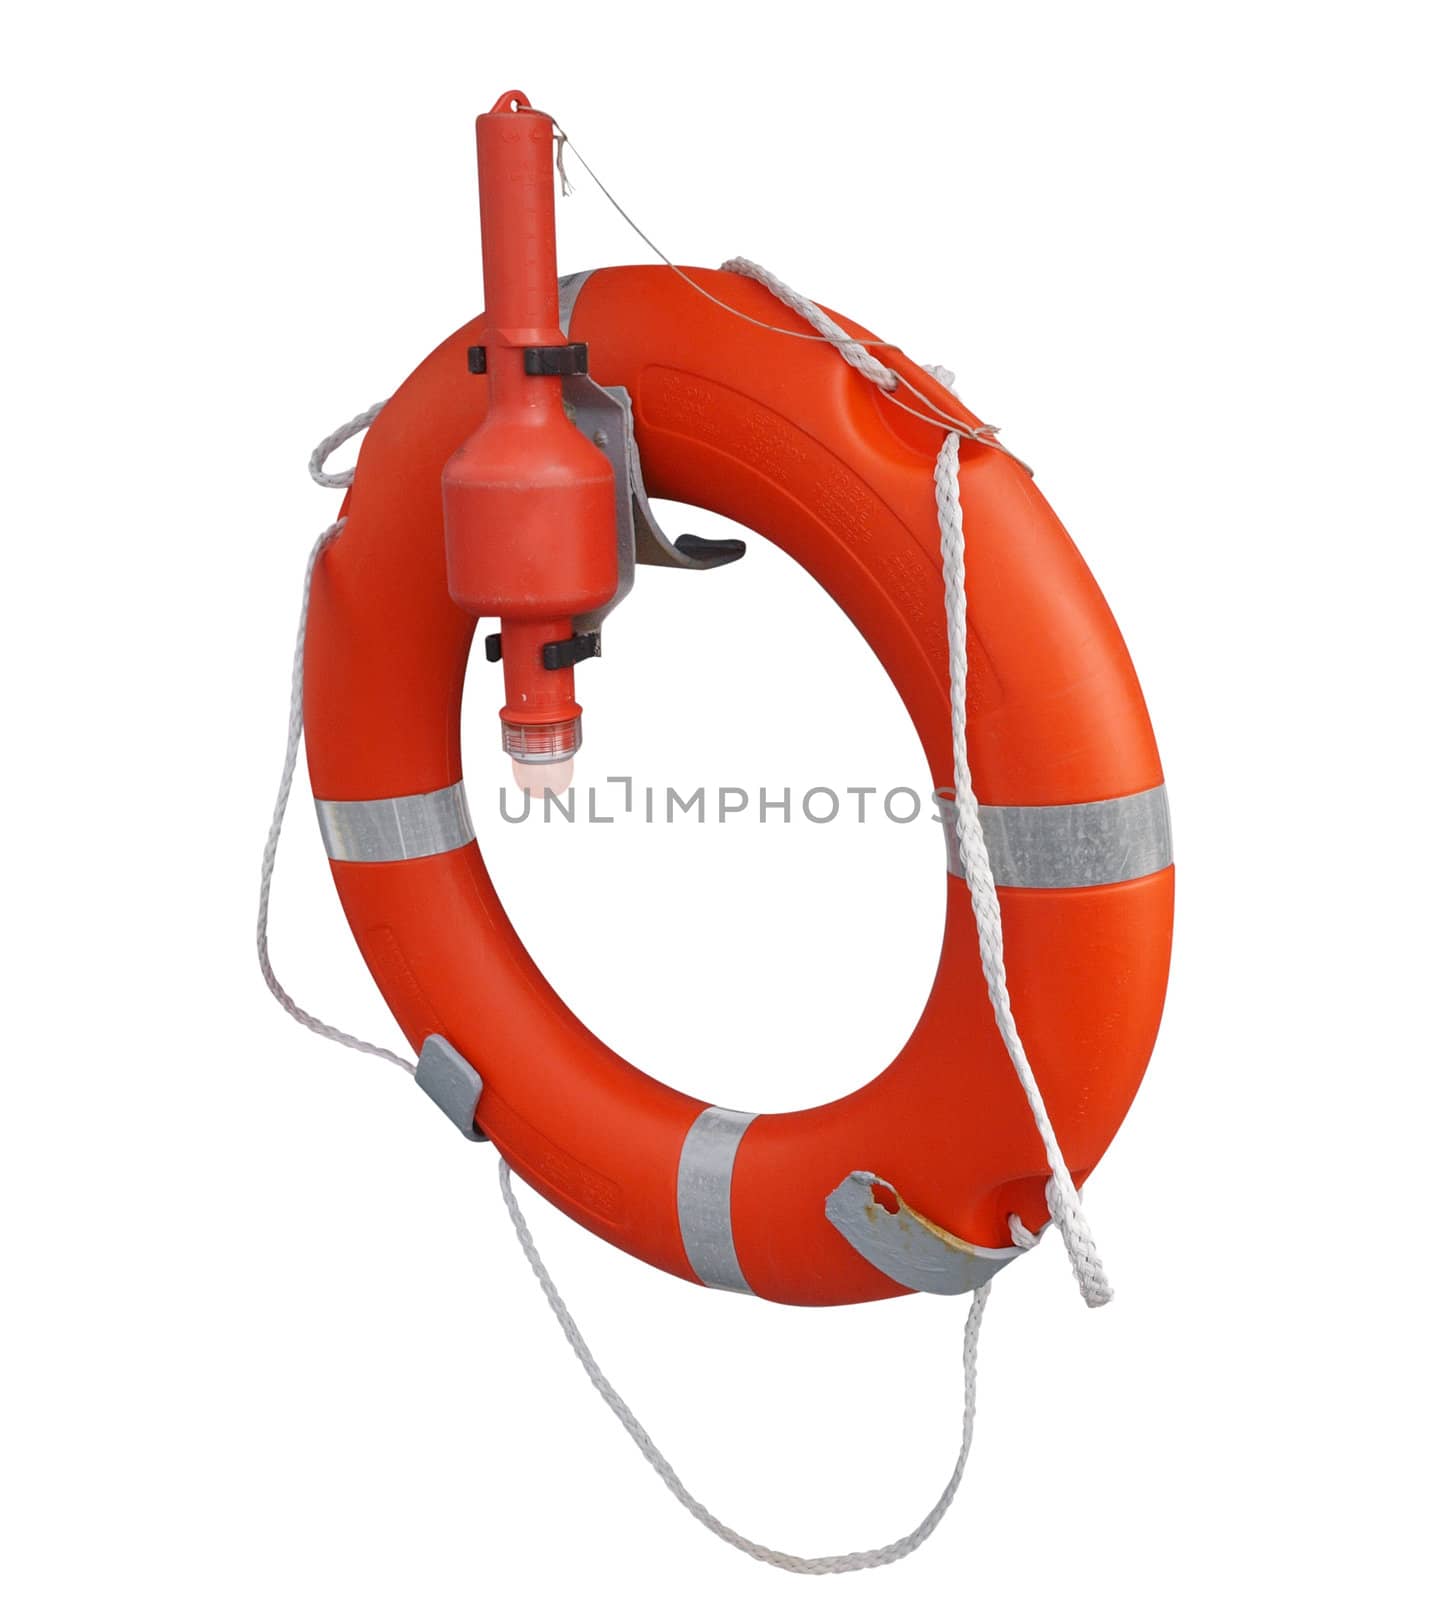 Life Buoy with light isolated with clipping path